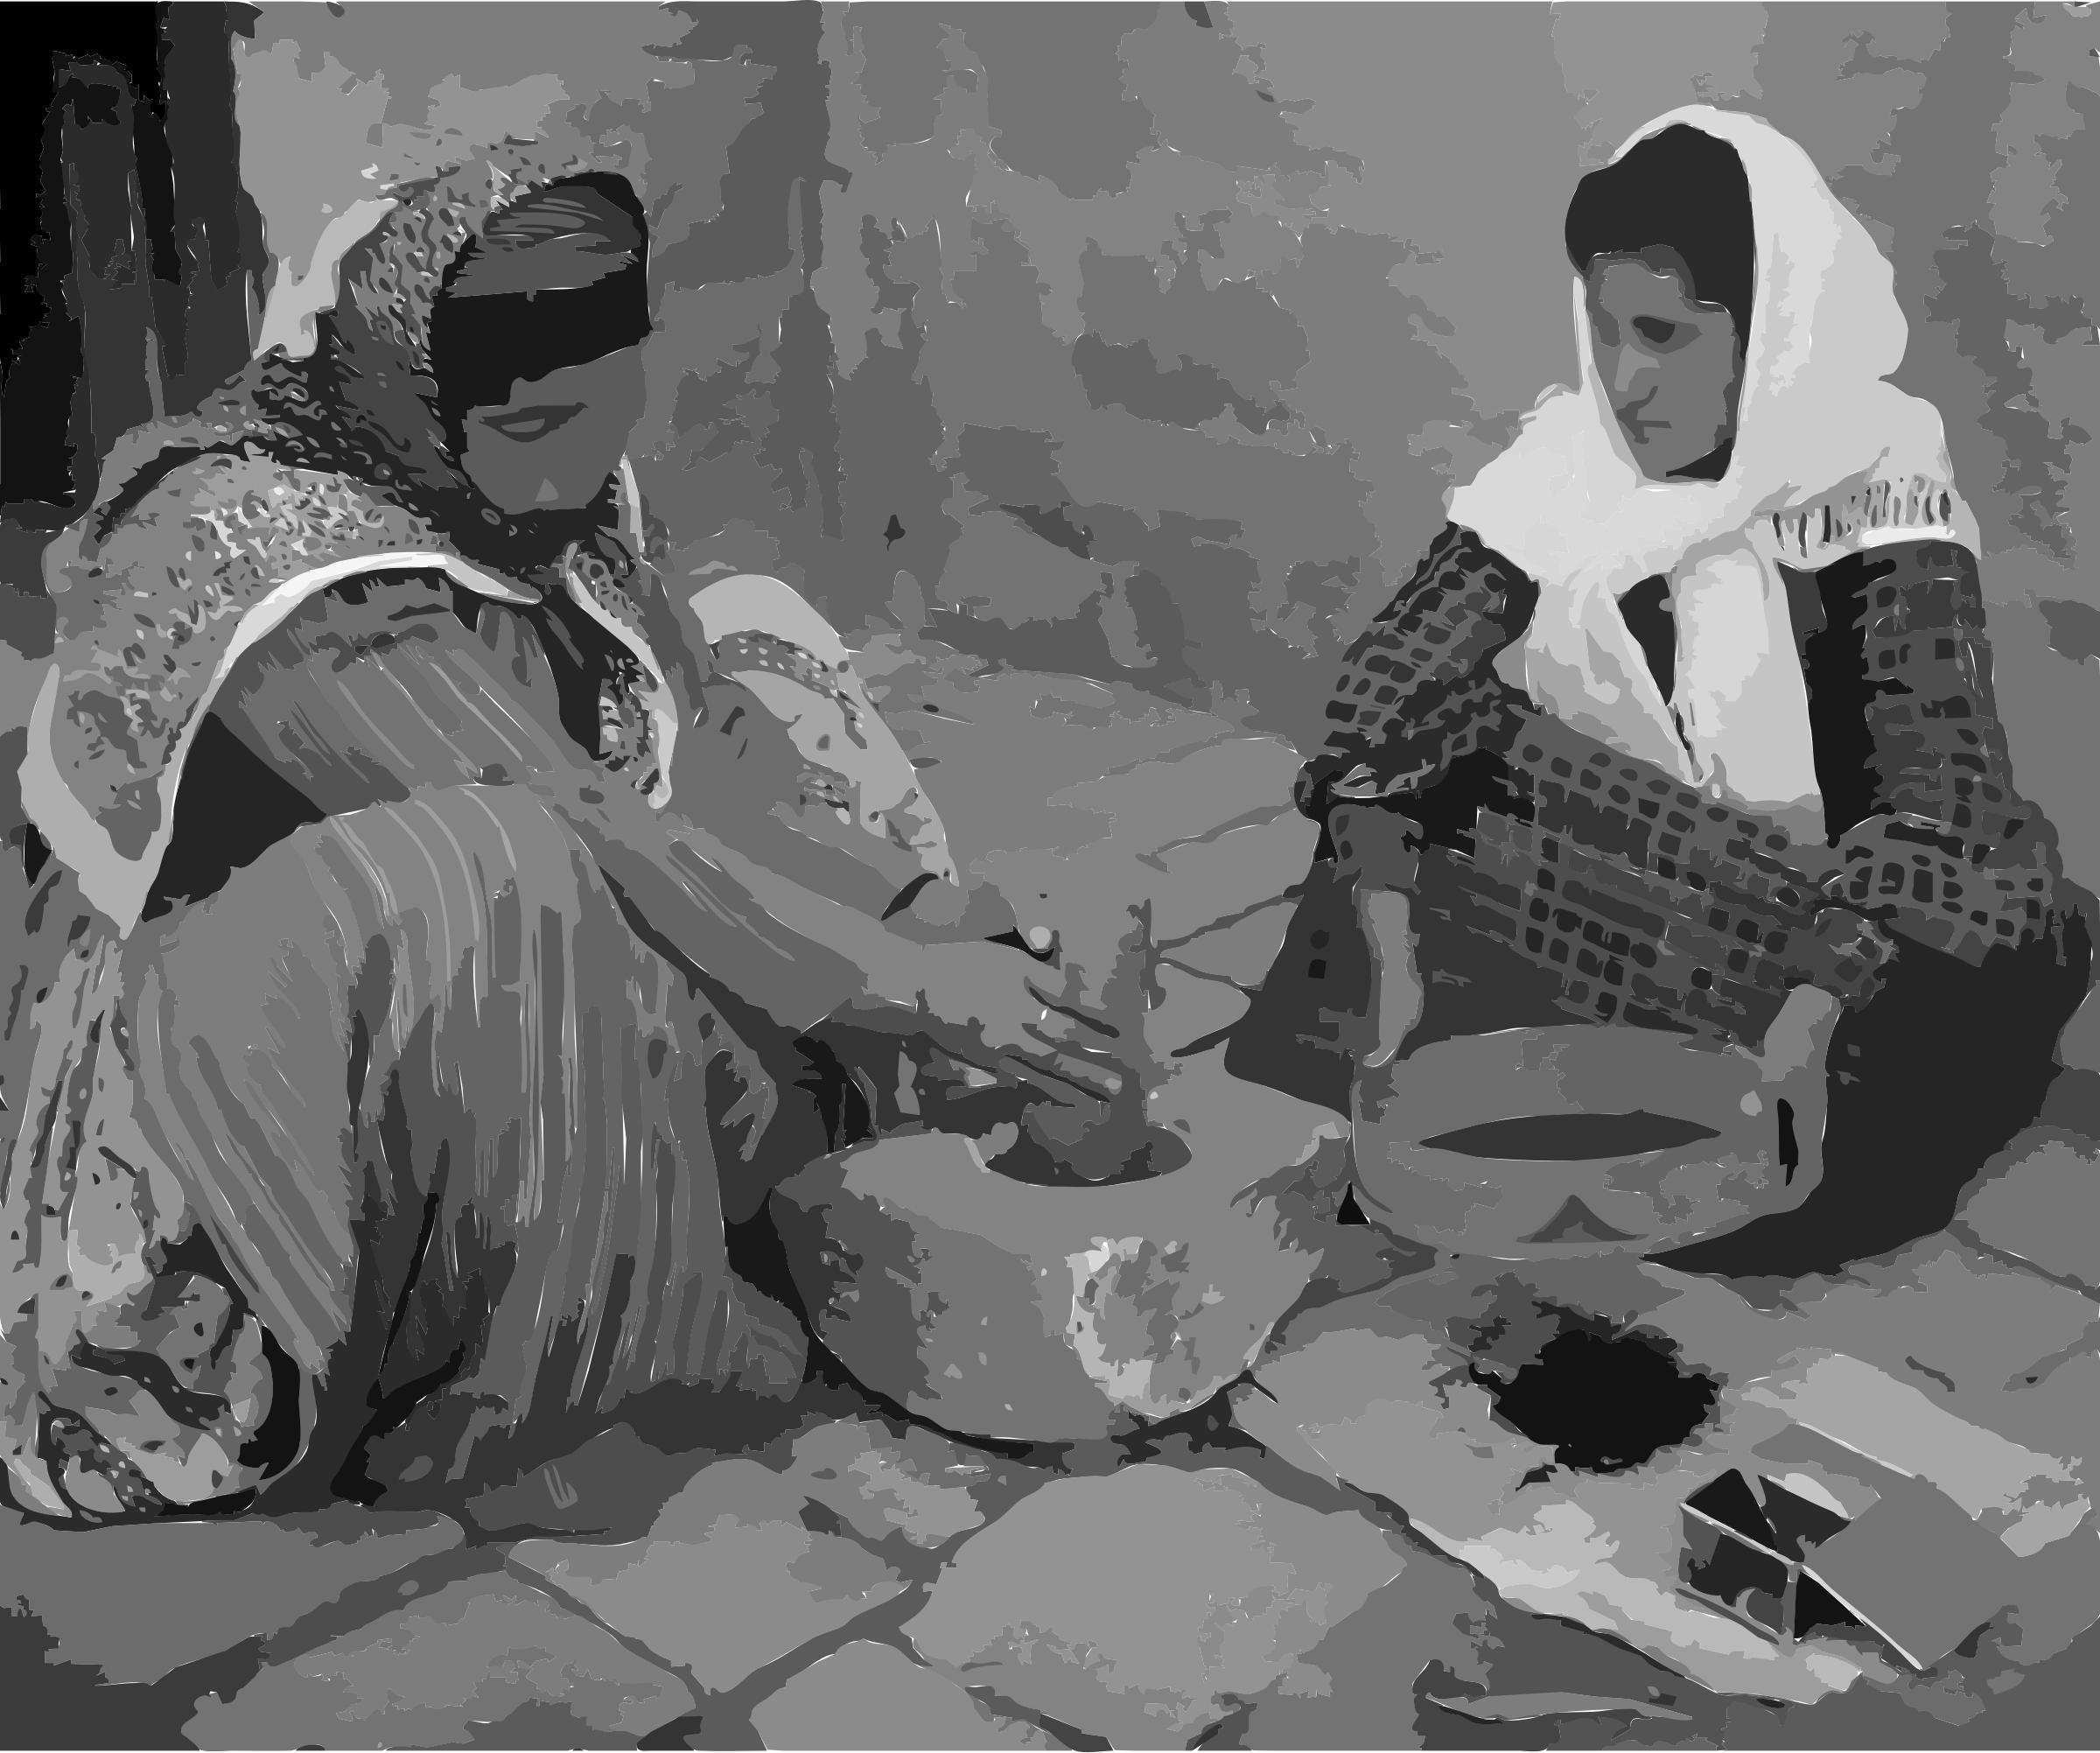 Palestinian women grinding coffee beans icons